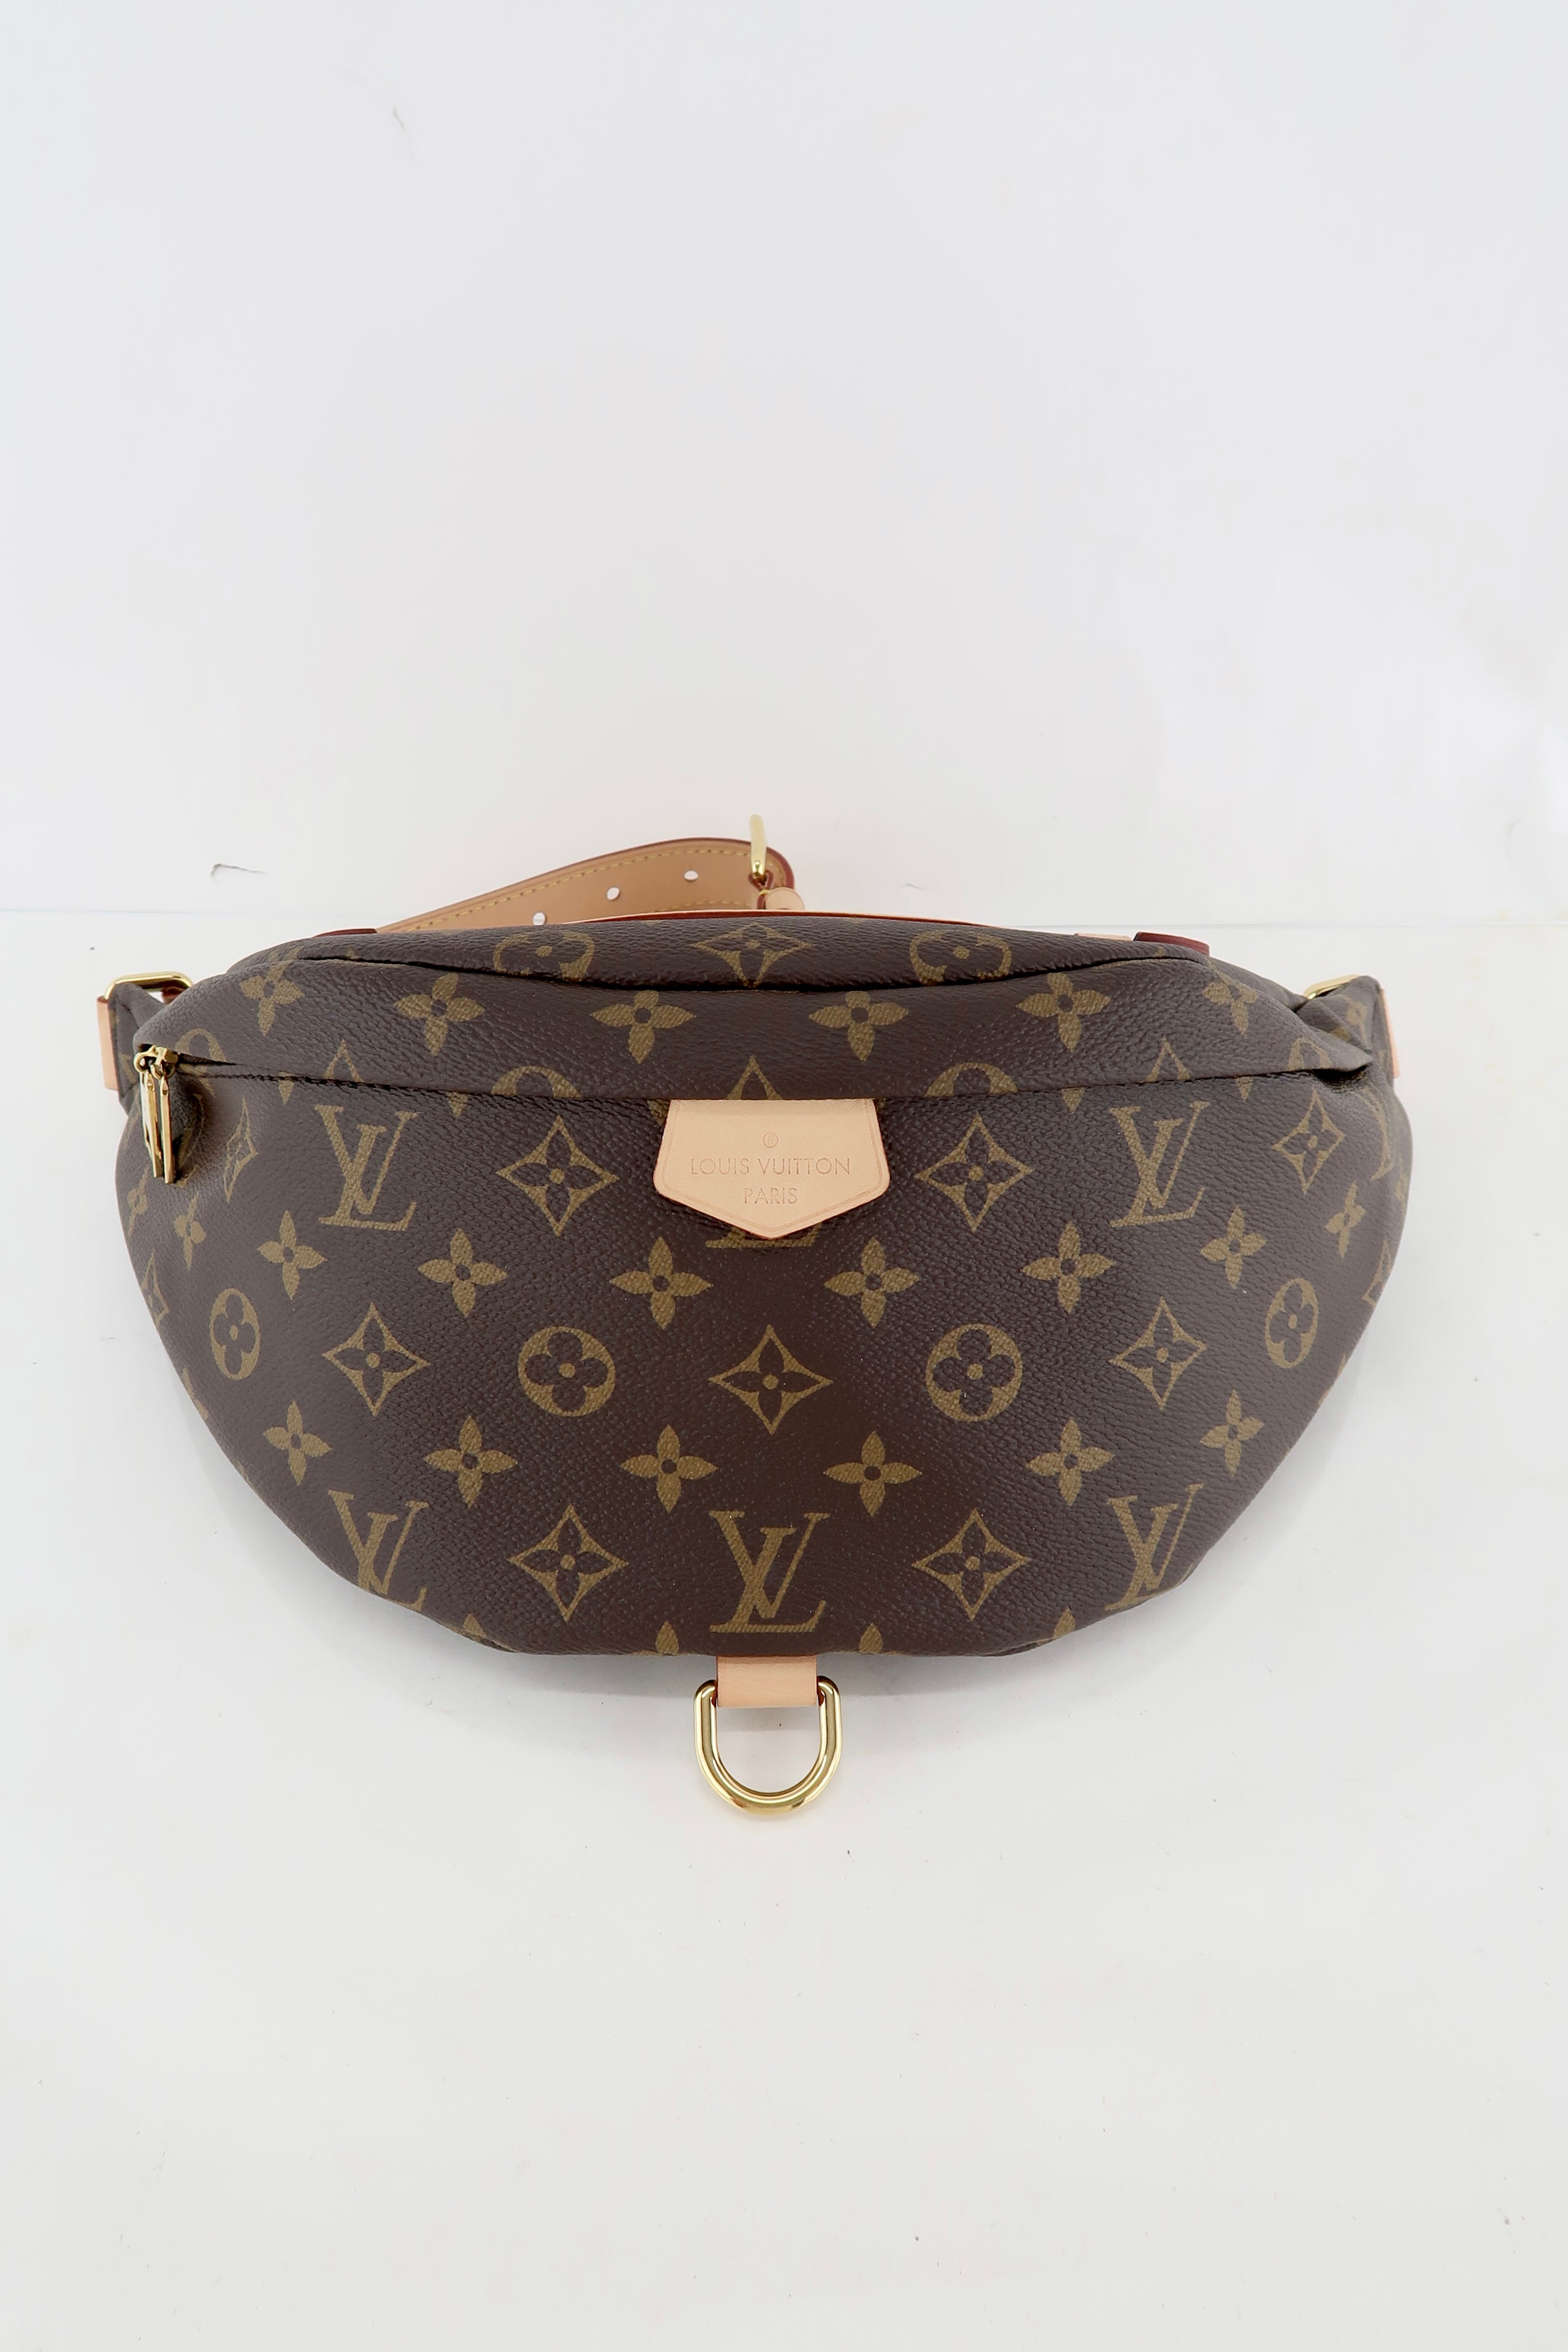 Pin on Louis Vuitton Bumbag Style and How to Wear